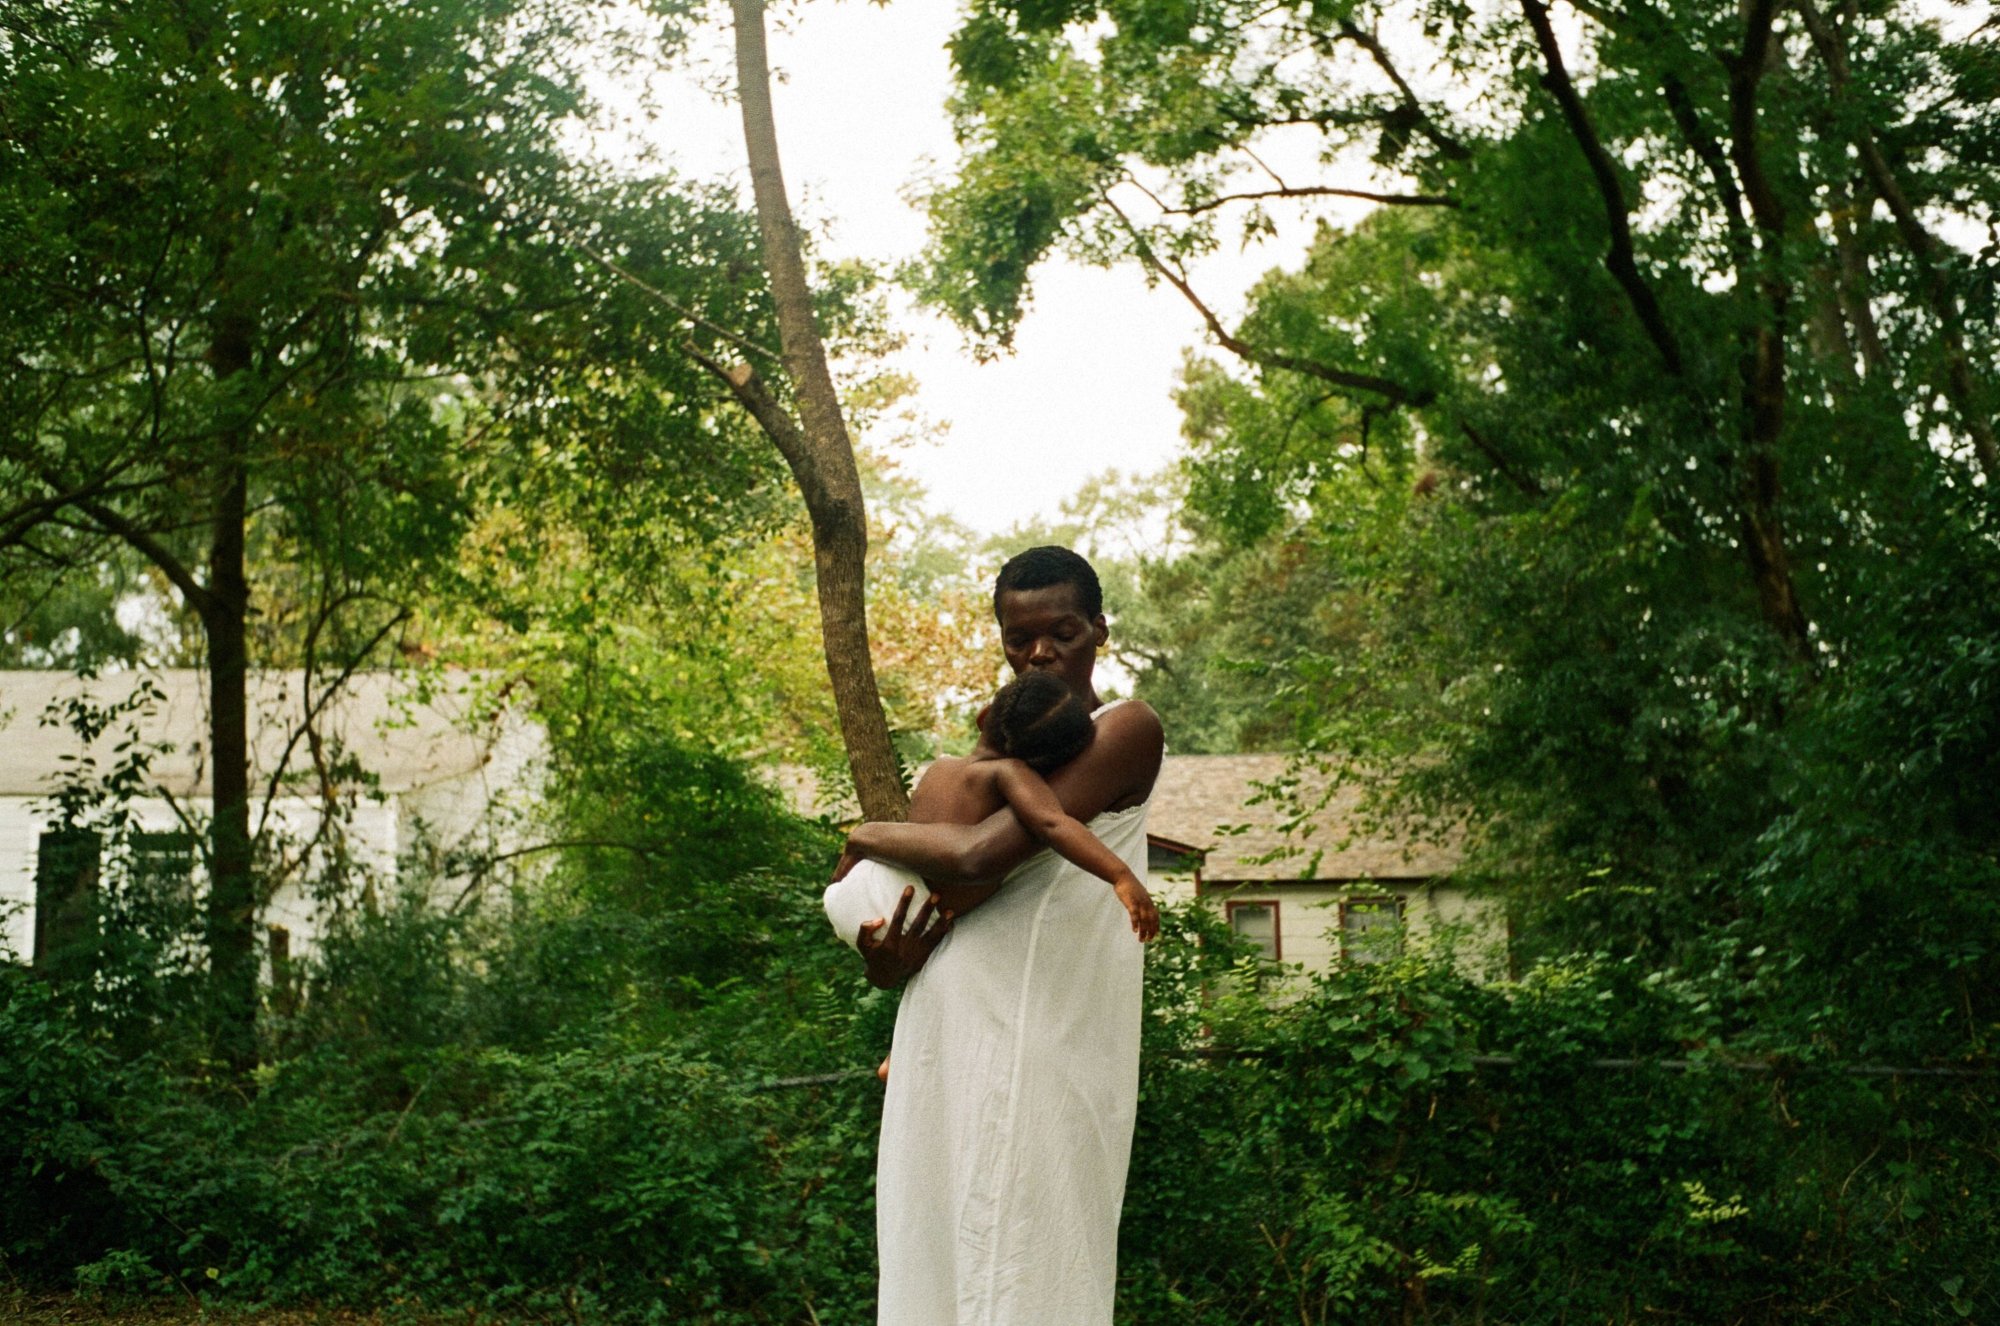 'All Dirt Roads Taste of Salt' Sheila Atim as Evelyn wearing all white, wearing a baby surrounded by greenery